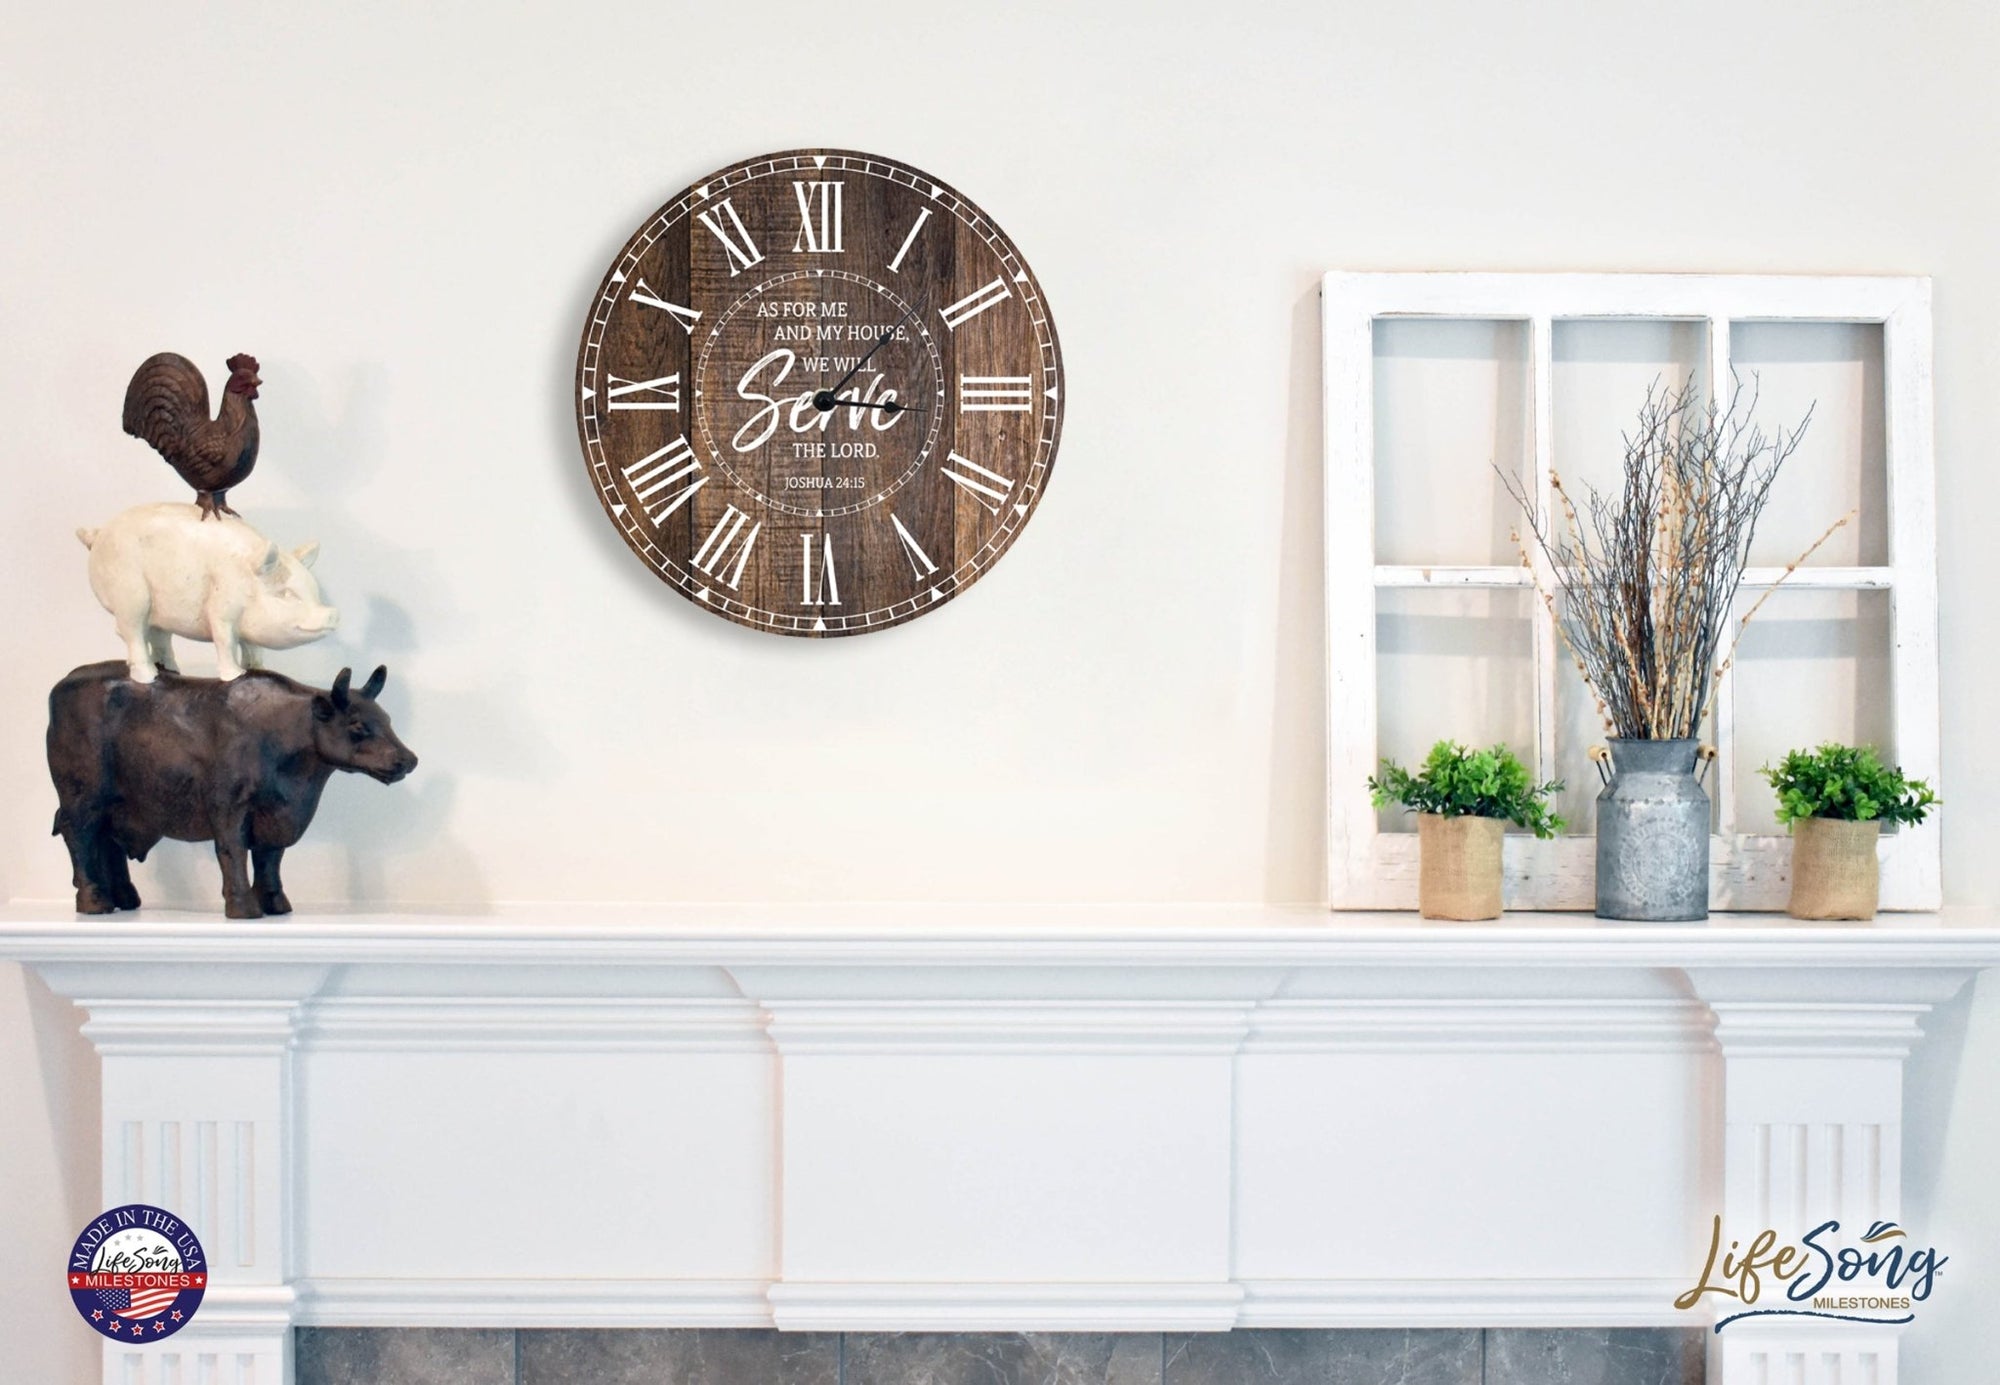 Everyday Home and Family Clock 12” x .0125” As For Me and My House - LifeSong Milestones